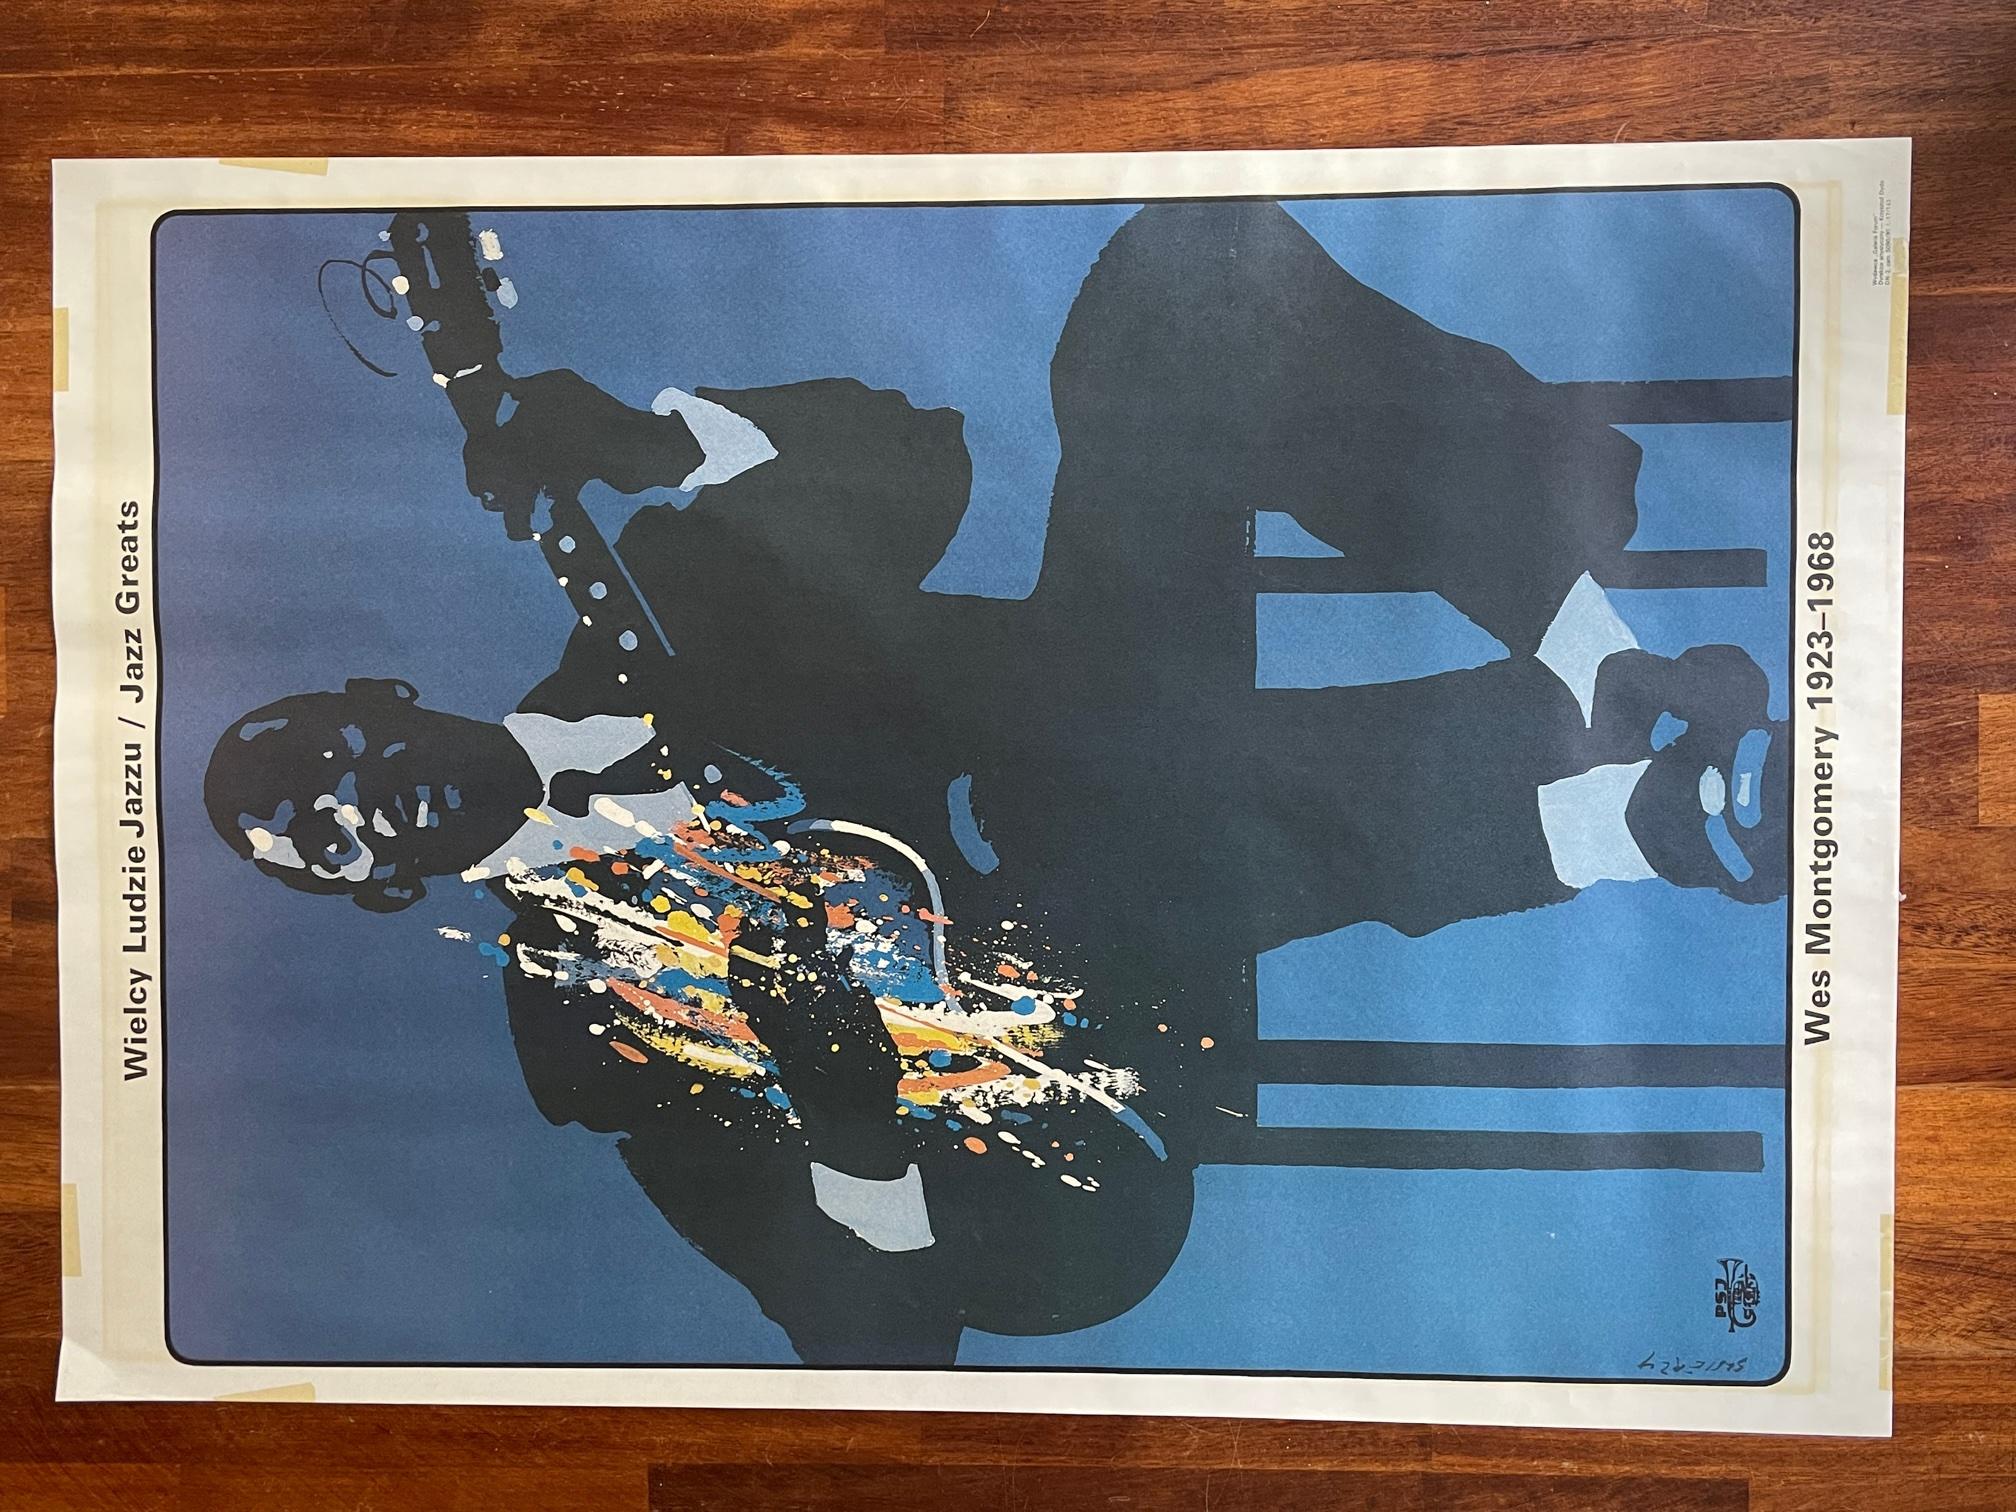 Beautiful original poster by Waldemar Swierzy. This famous artist is known for its music, event, exhibition posters. This specific one was made for a jazz festival and is an tribute to Wes Montgomery. Real good condition. minor decoloration.